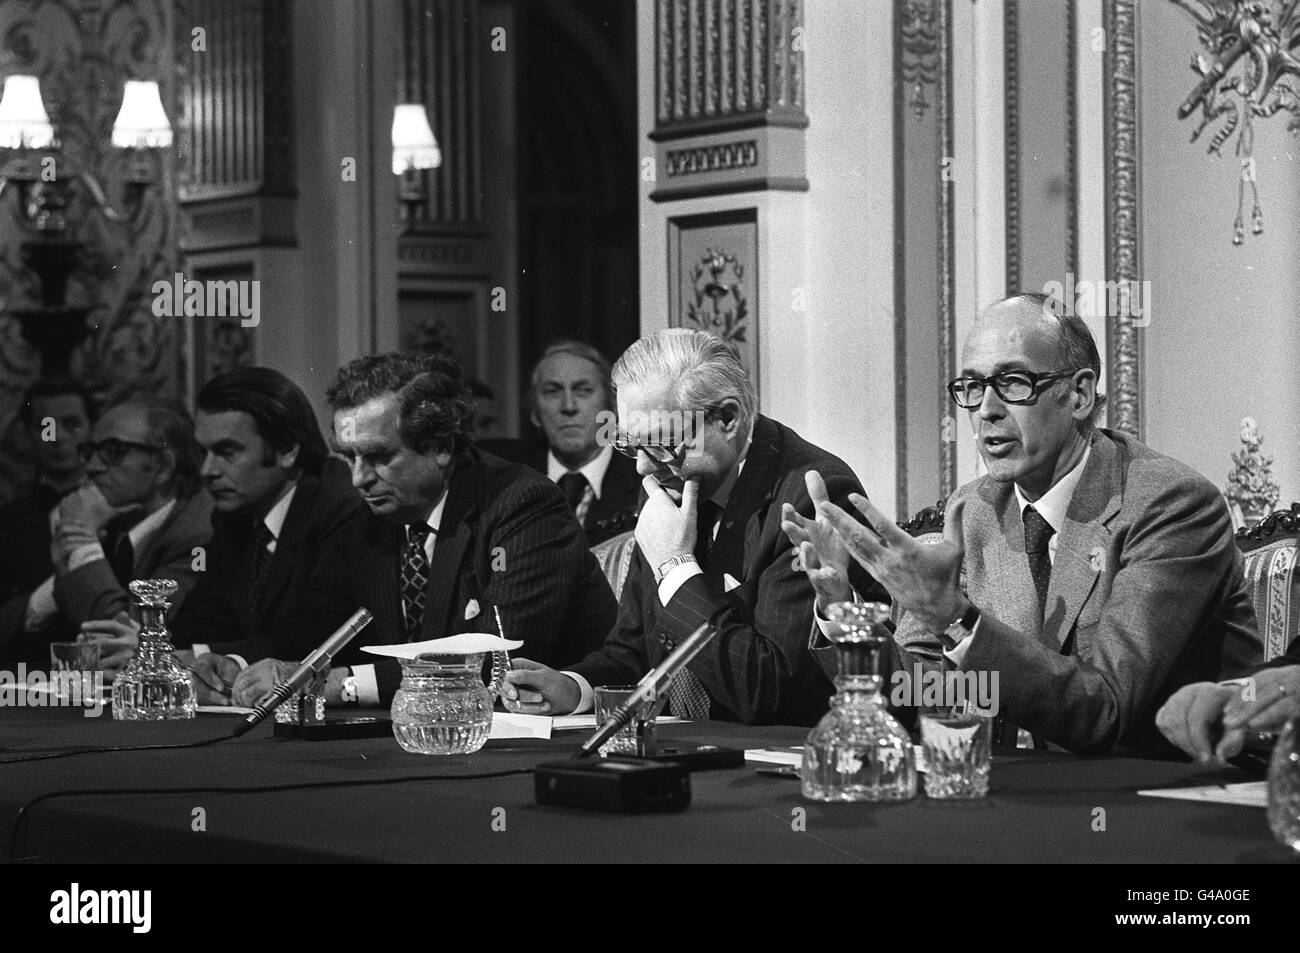 PA NEWS PHOTO 13/12/77 THE SCENE AT HALTON HOUSE, RAF HALTON DURING A JOINT PRESS CONFERENCE BETWEEN FRENCH PRESIDENT VALERY GISCARD D' ESTAING (RIGHT) AND PREMIER JAMES CALLAGHAN (SECOND RIGHT) . ALSO IN ATTENDANCE MR. DENIS HEALEY (CENTRE) THE CHANCELLOR OF THE EXCHEQUER AND DR DAVID OWEN THE FOREIGN SECRETARY. THE PRESS CONFERENCE CAME AT THE END OF THE 24 HOUR ANGLO-FRENCH SUMMITAT CHEQUERS. Stock Photo